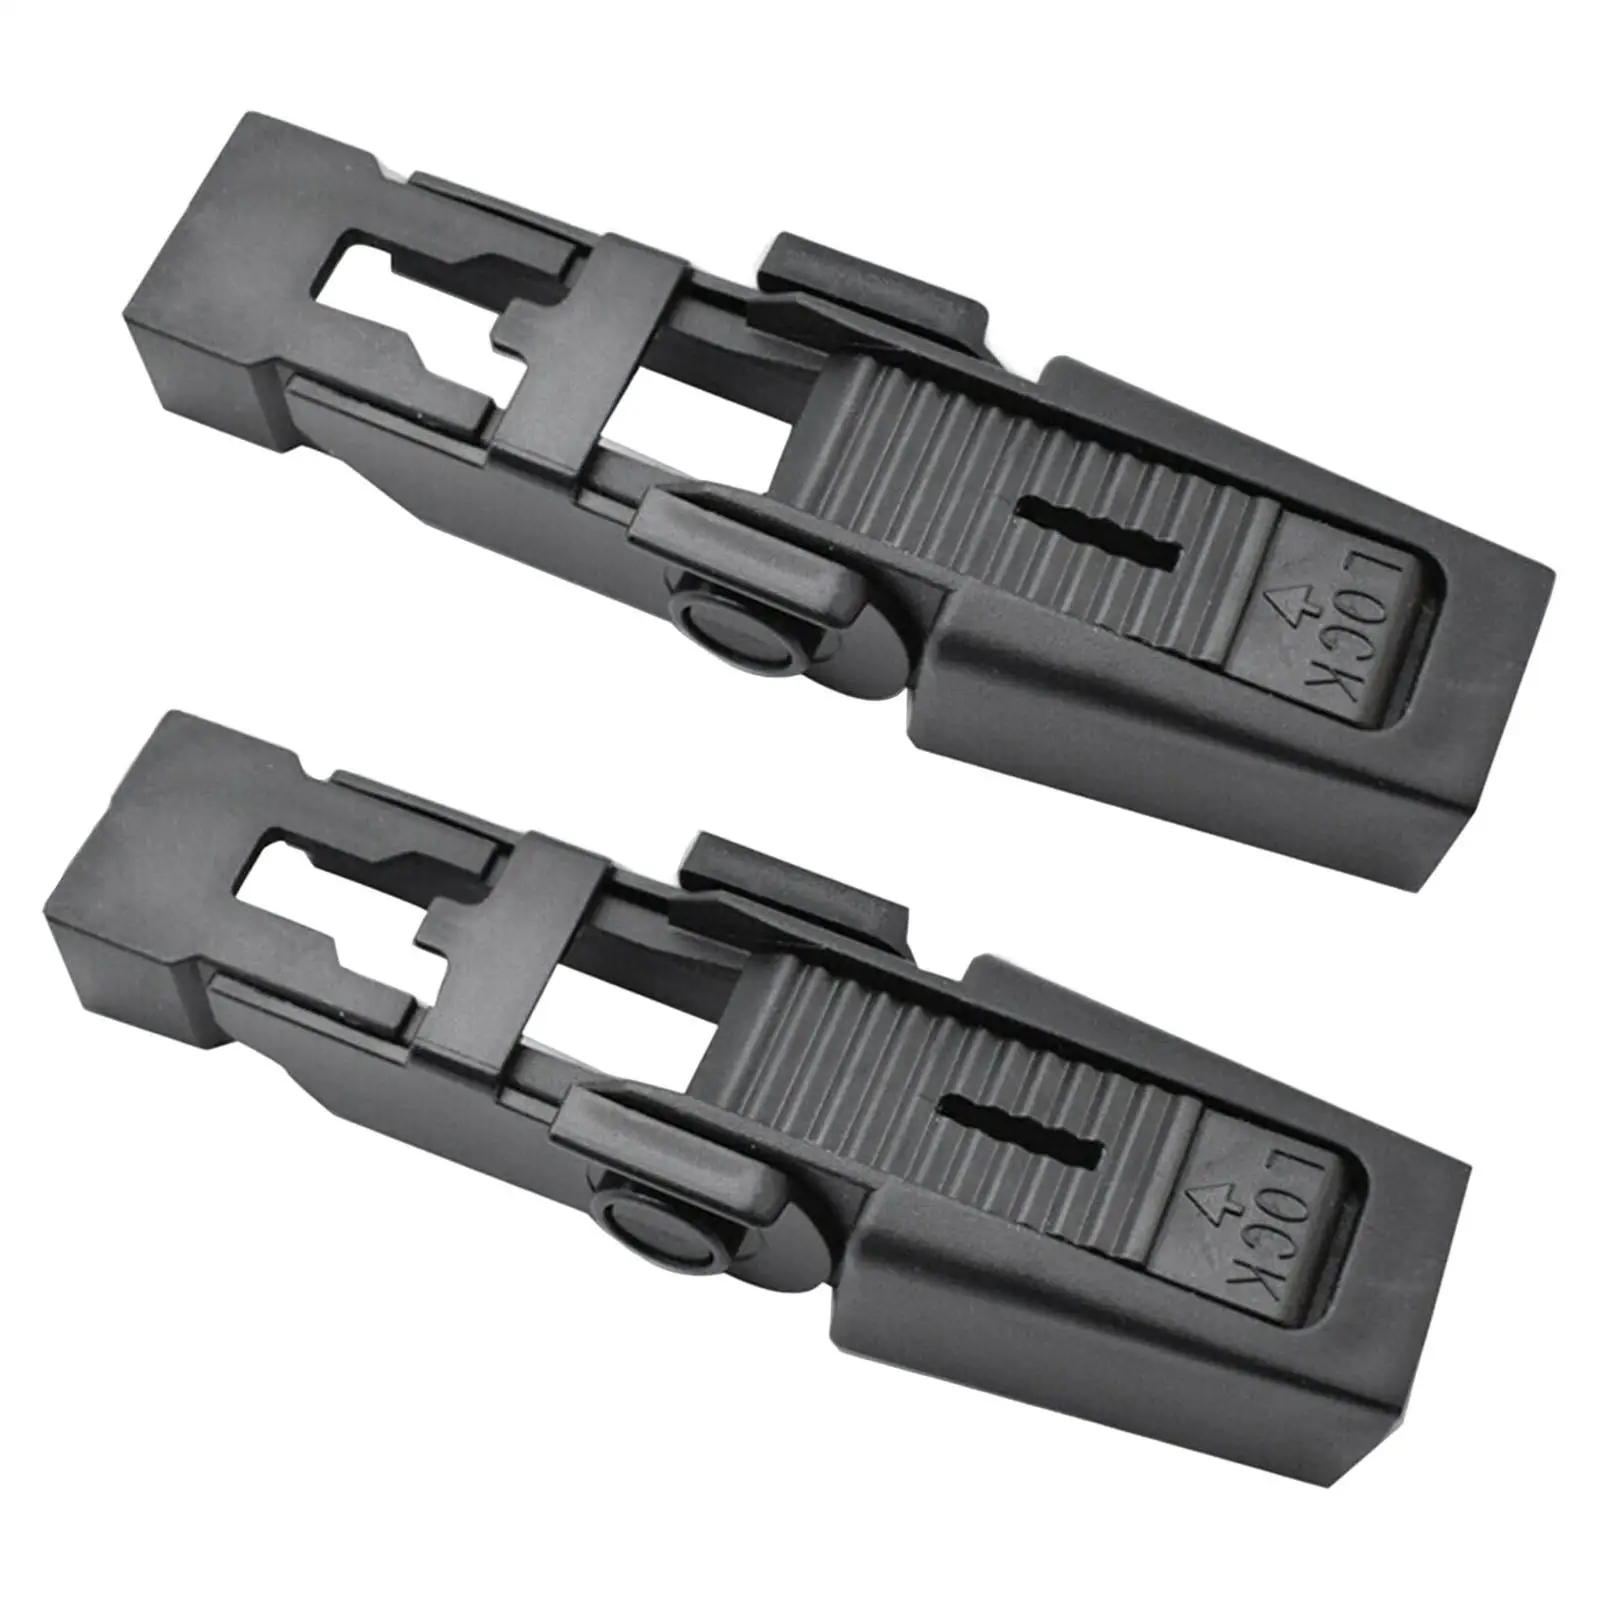 2x Auto Front Windshield Wiper Clip Dkw100020 Black for Discovery 2 L322 Replace Parts High Quality